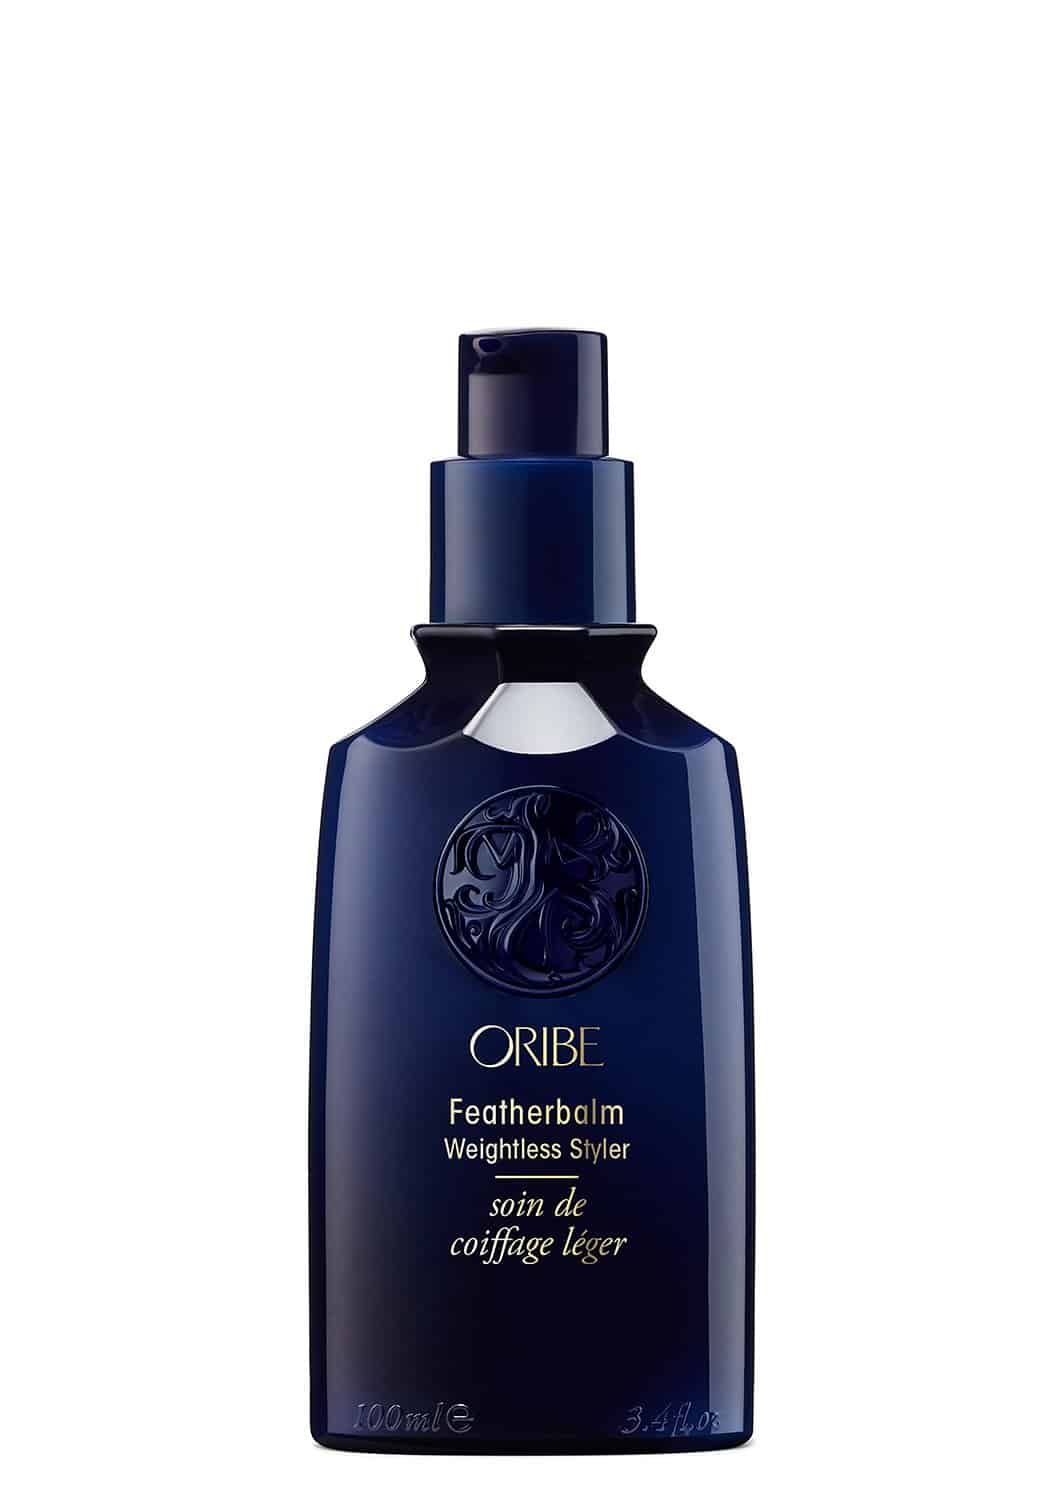 Oribe Featherbalm Weightless Styler blue bottle with gold text